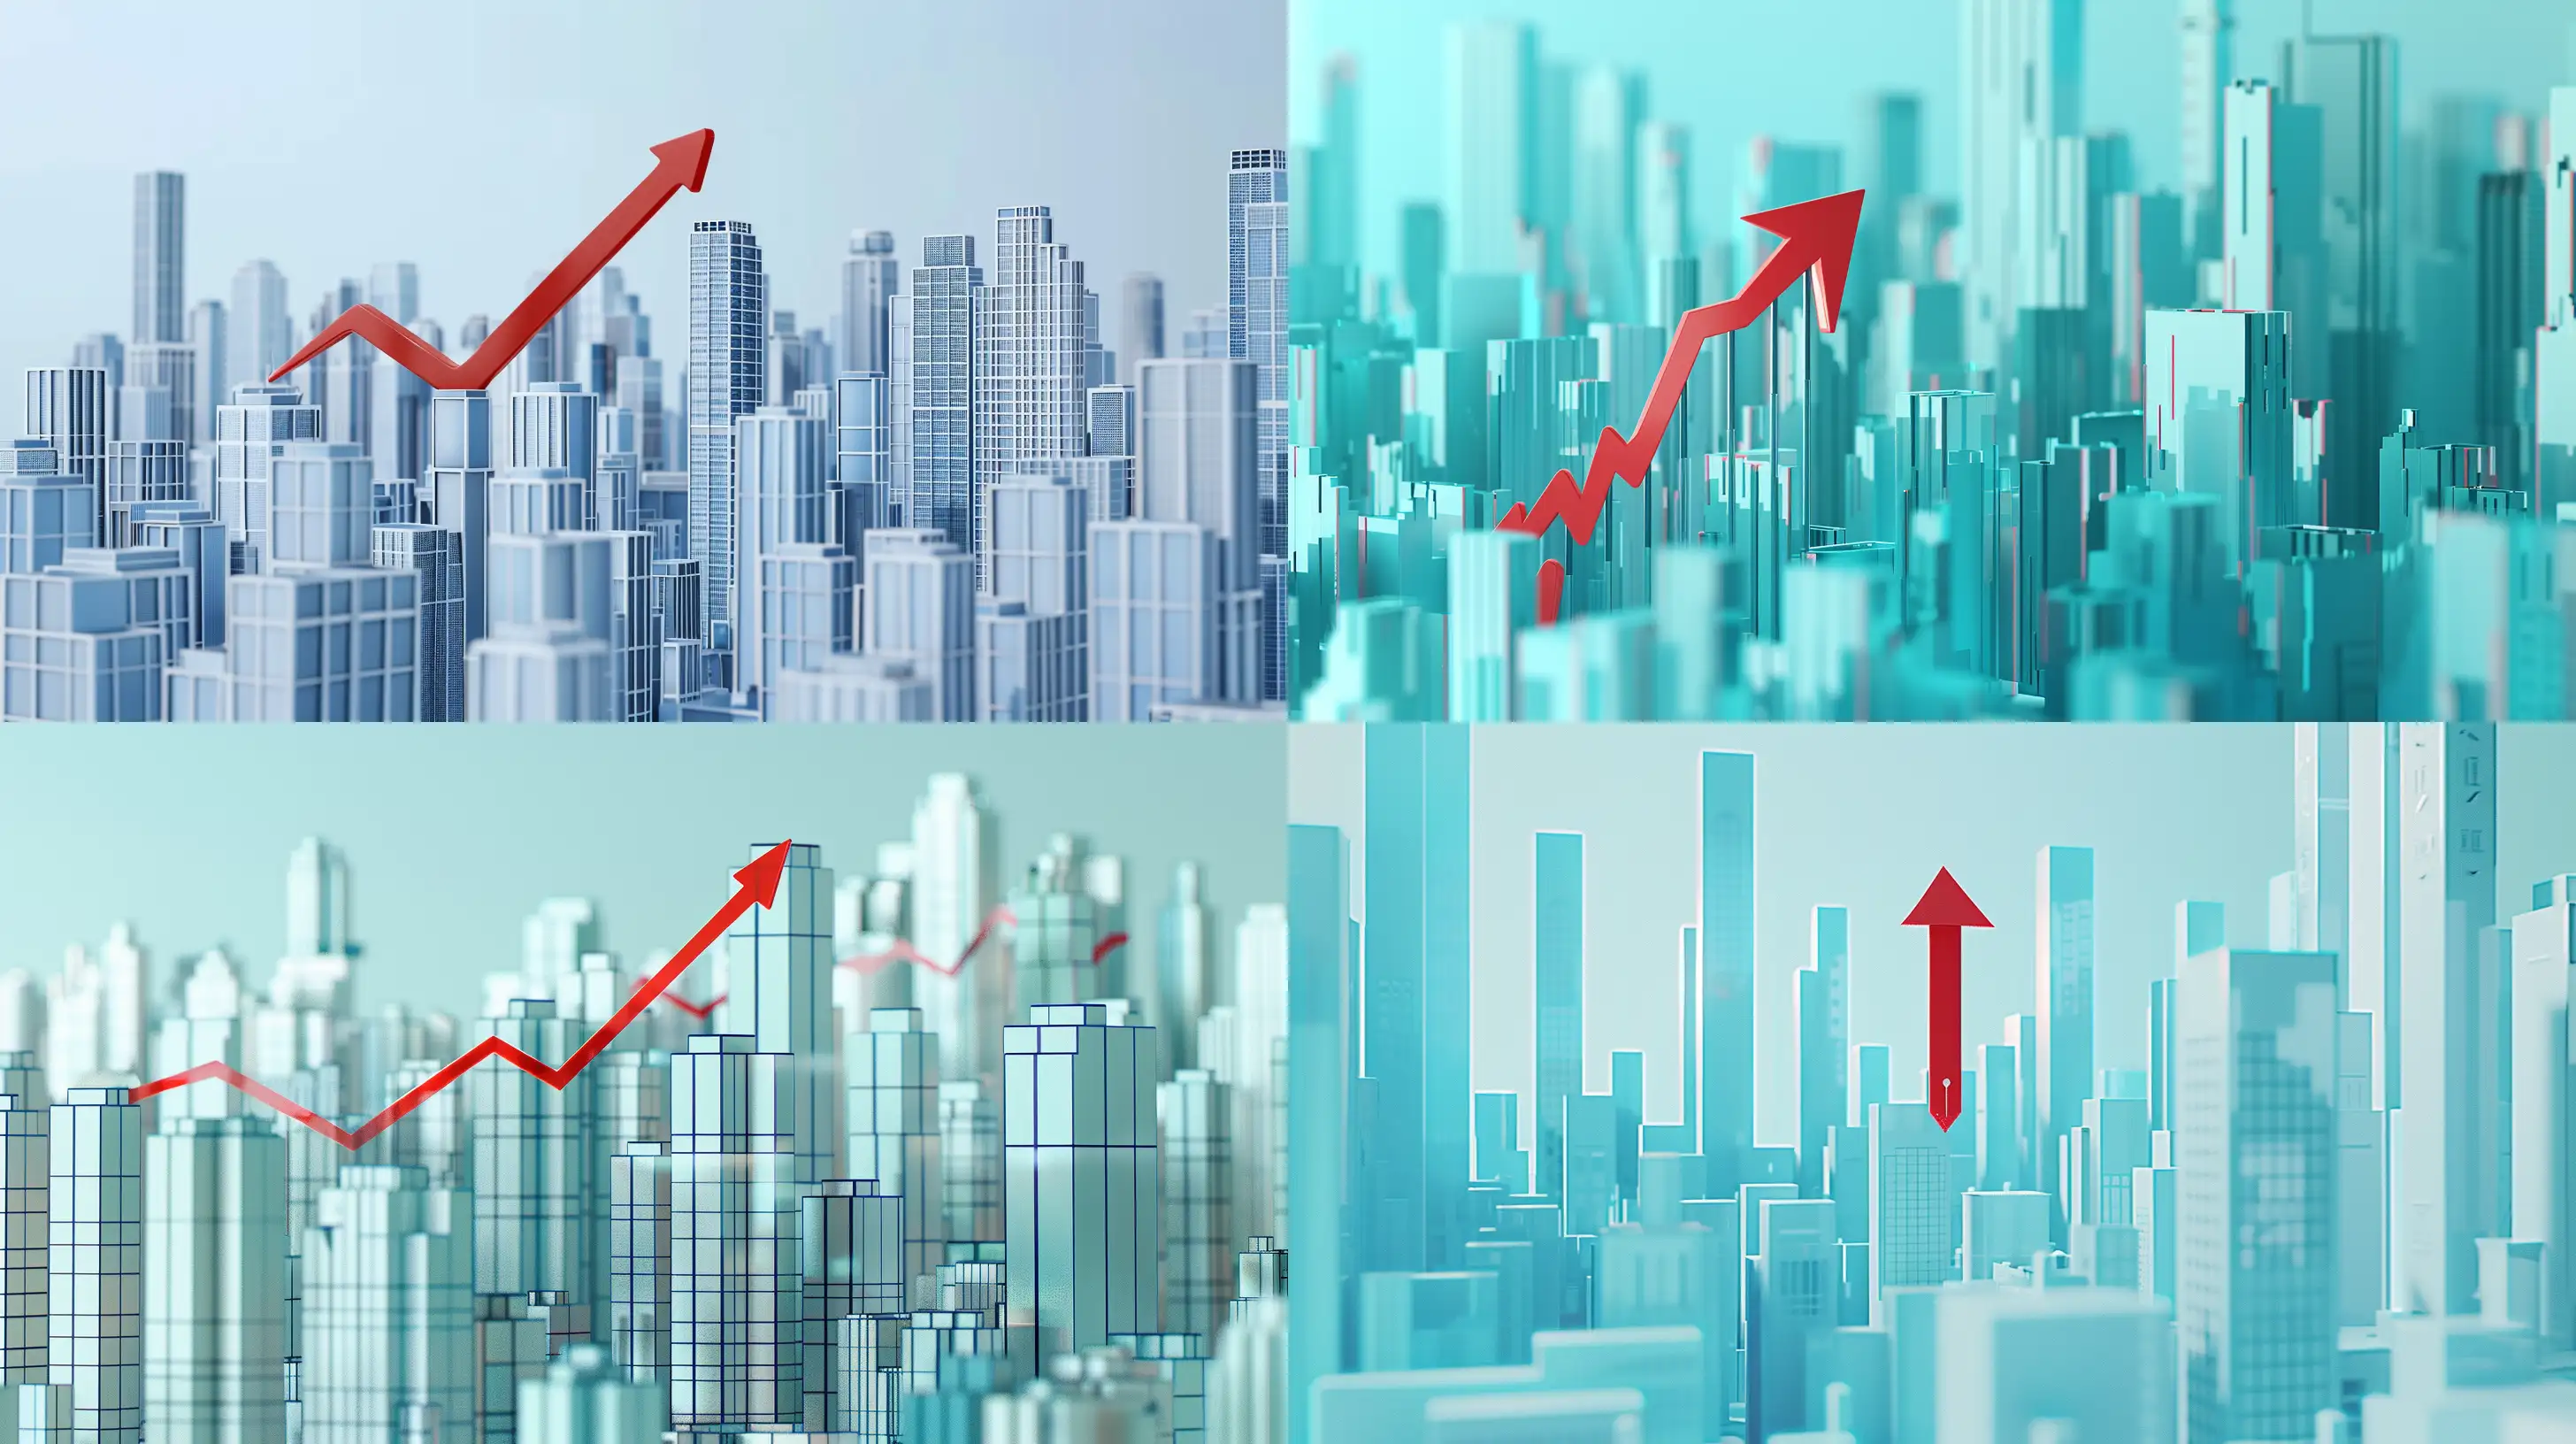 Dynamic-Economic-Growth-3D-Stylized-Inflation-Graph-Over-Urban-Landscape